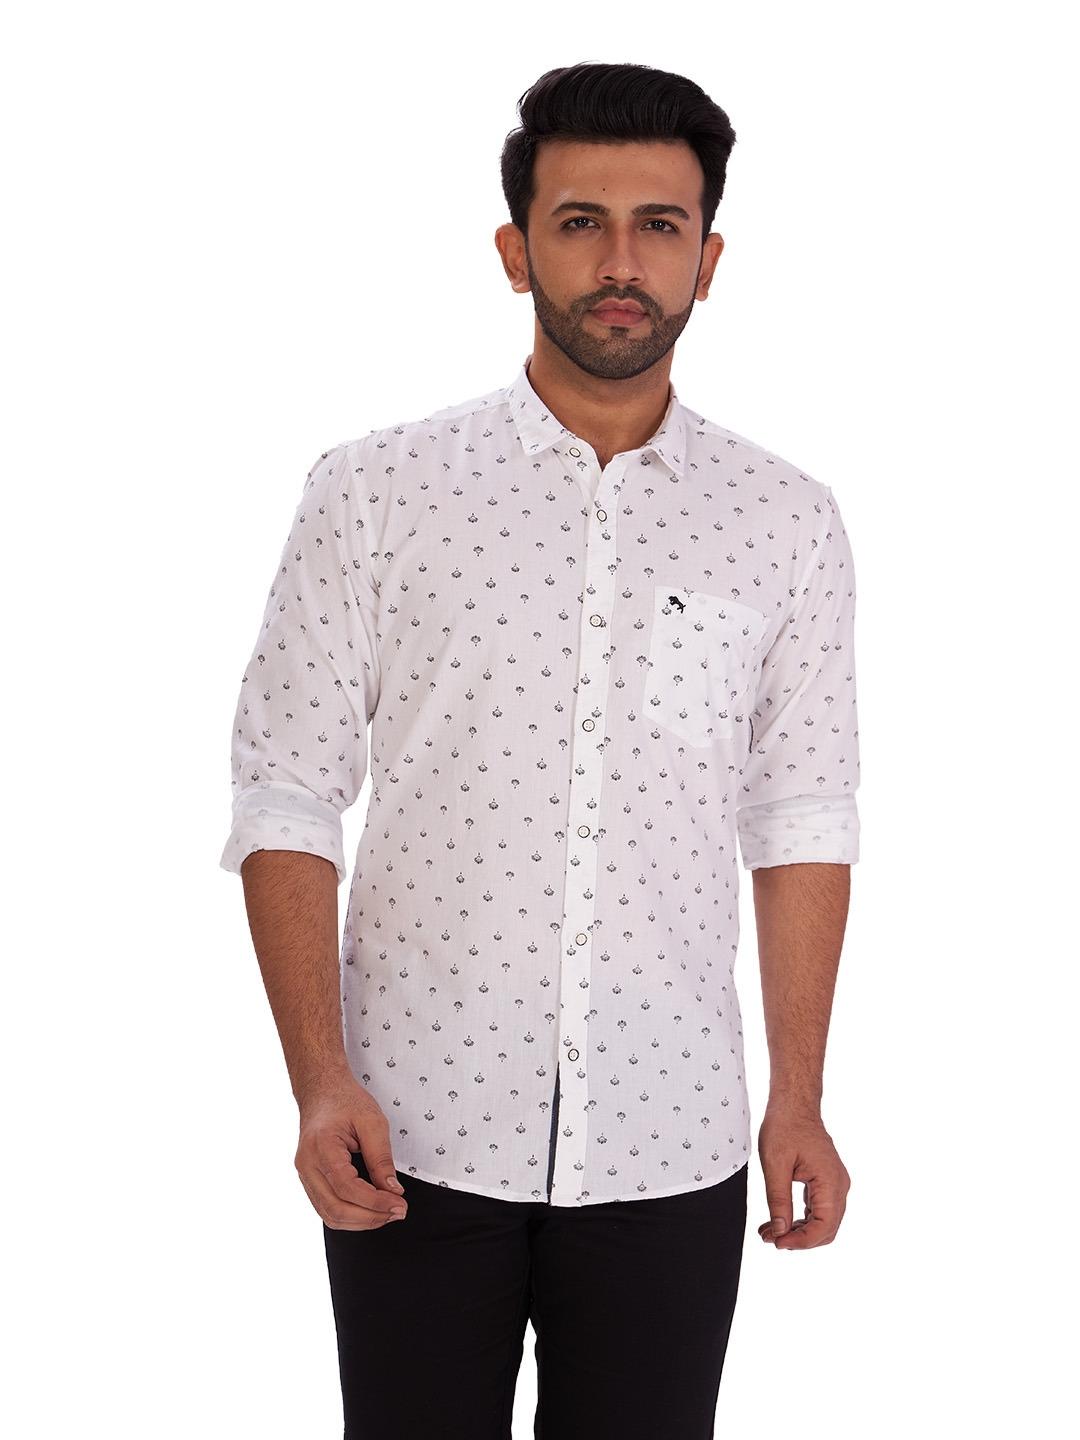 D'cot by Donear | D'cot by Donear Mens White Cotton Casual Shirts